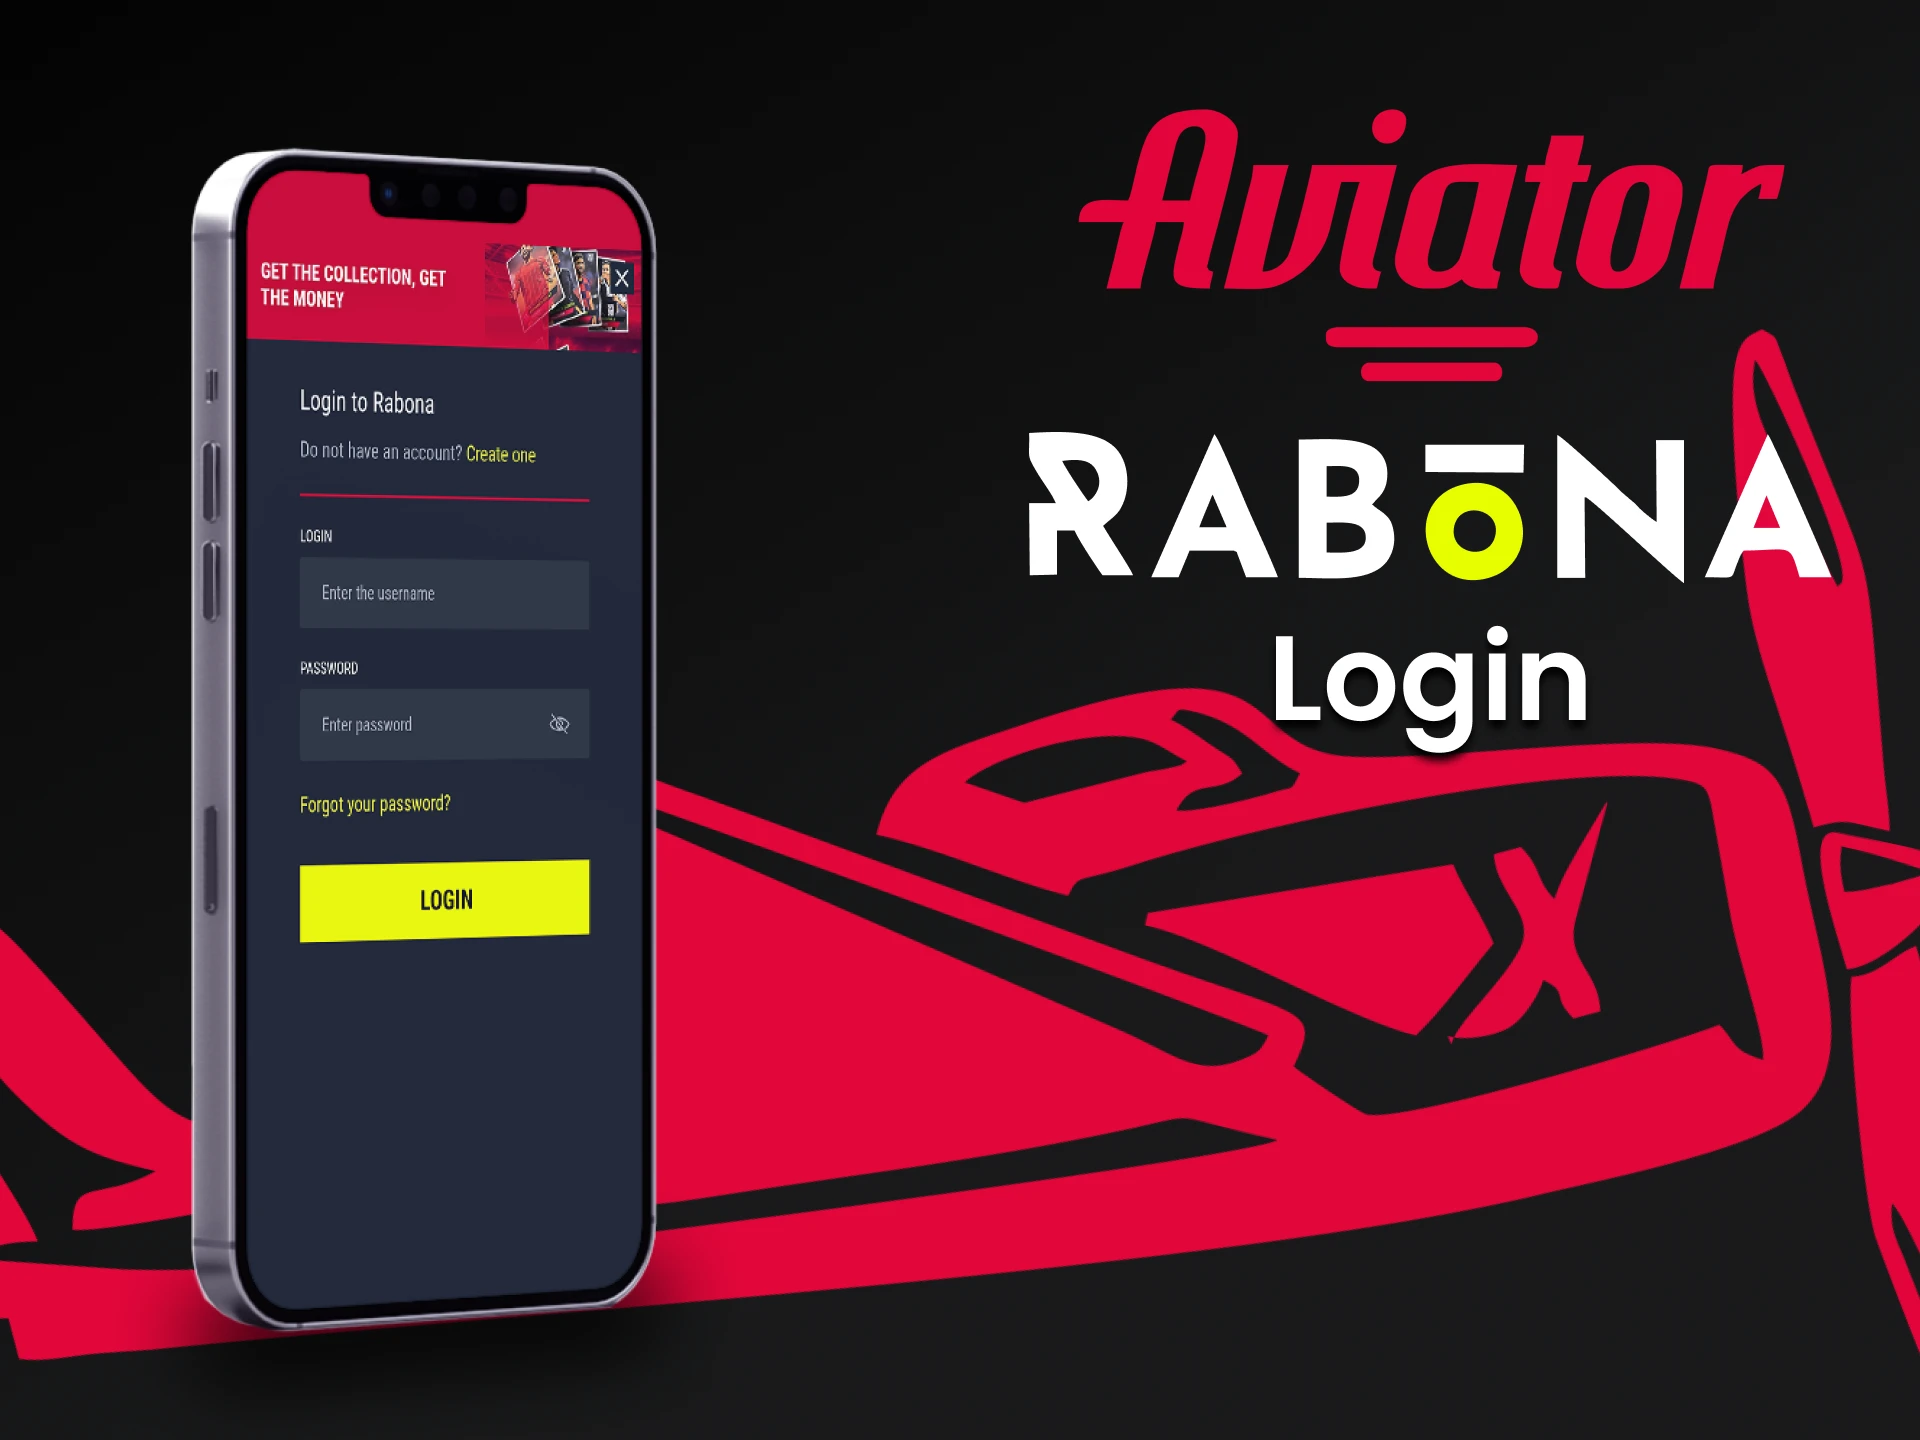 Log in to your account through the Rabona app to play Aviator.